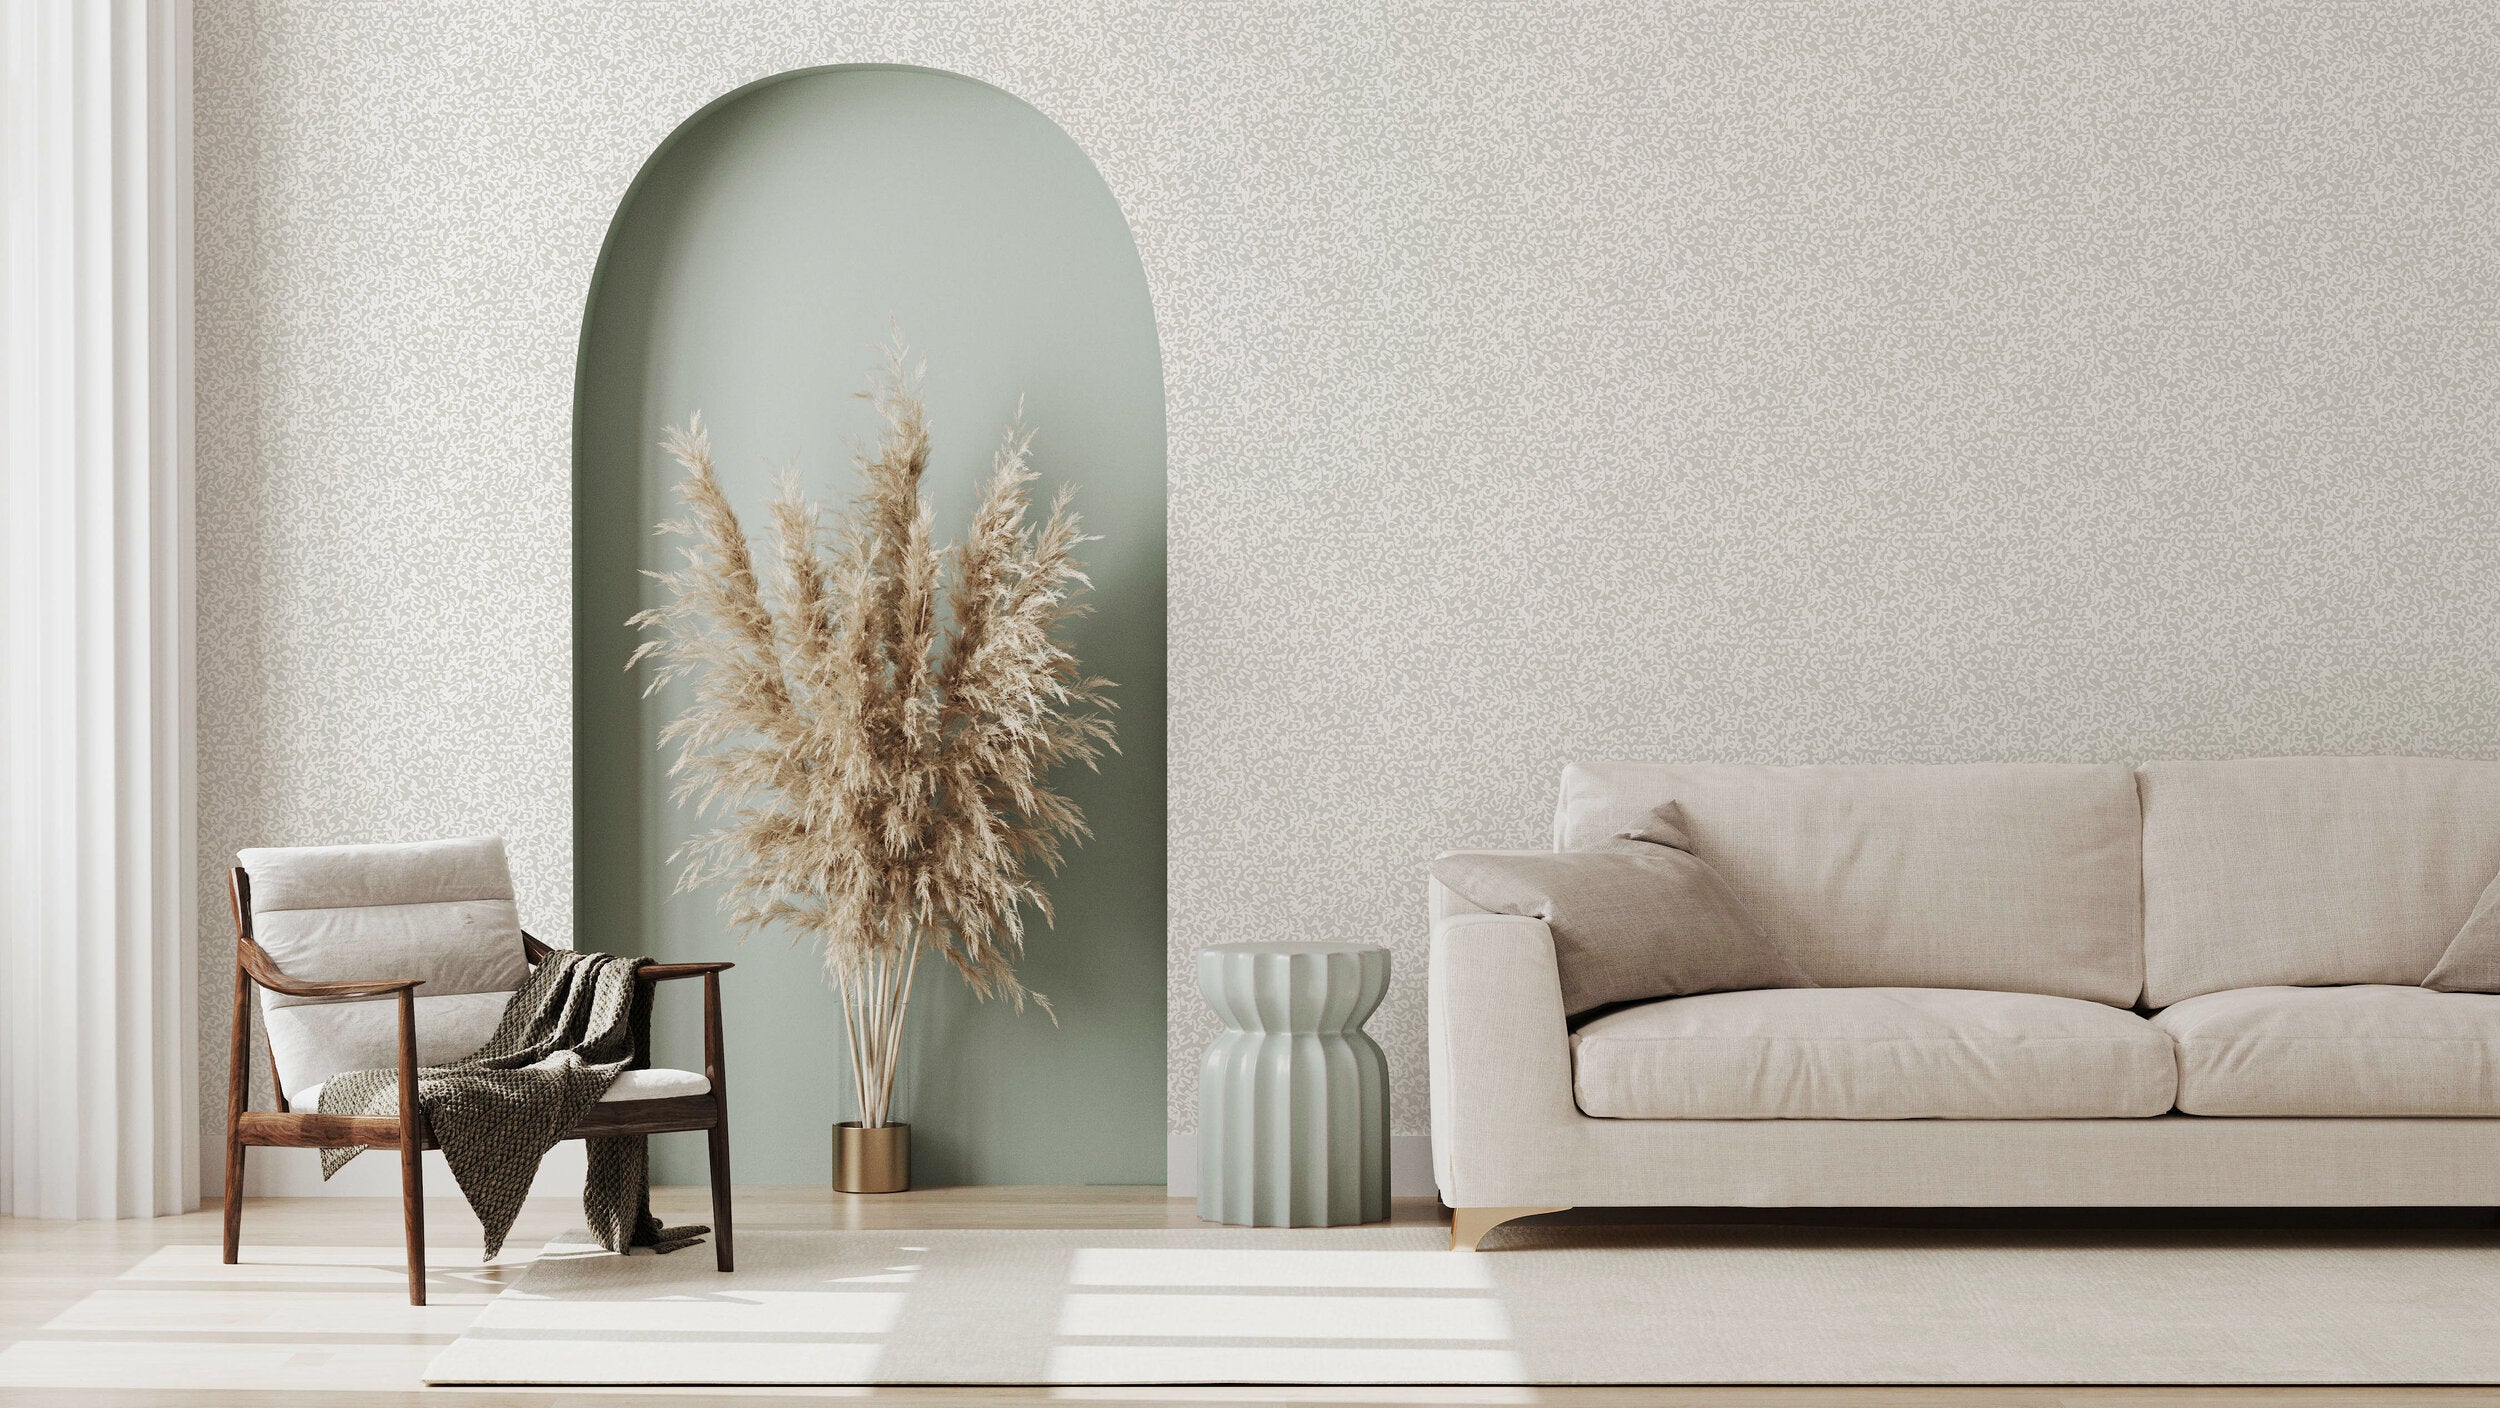 A modernist living room with a wall papered in a painterly abstract print in white on a light gray field.